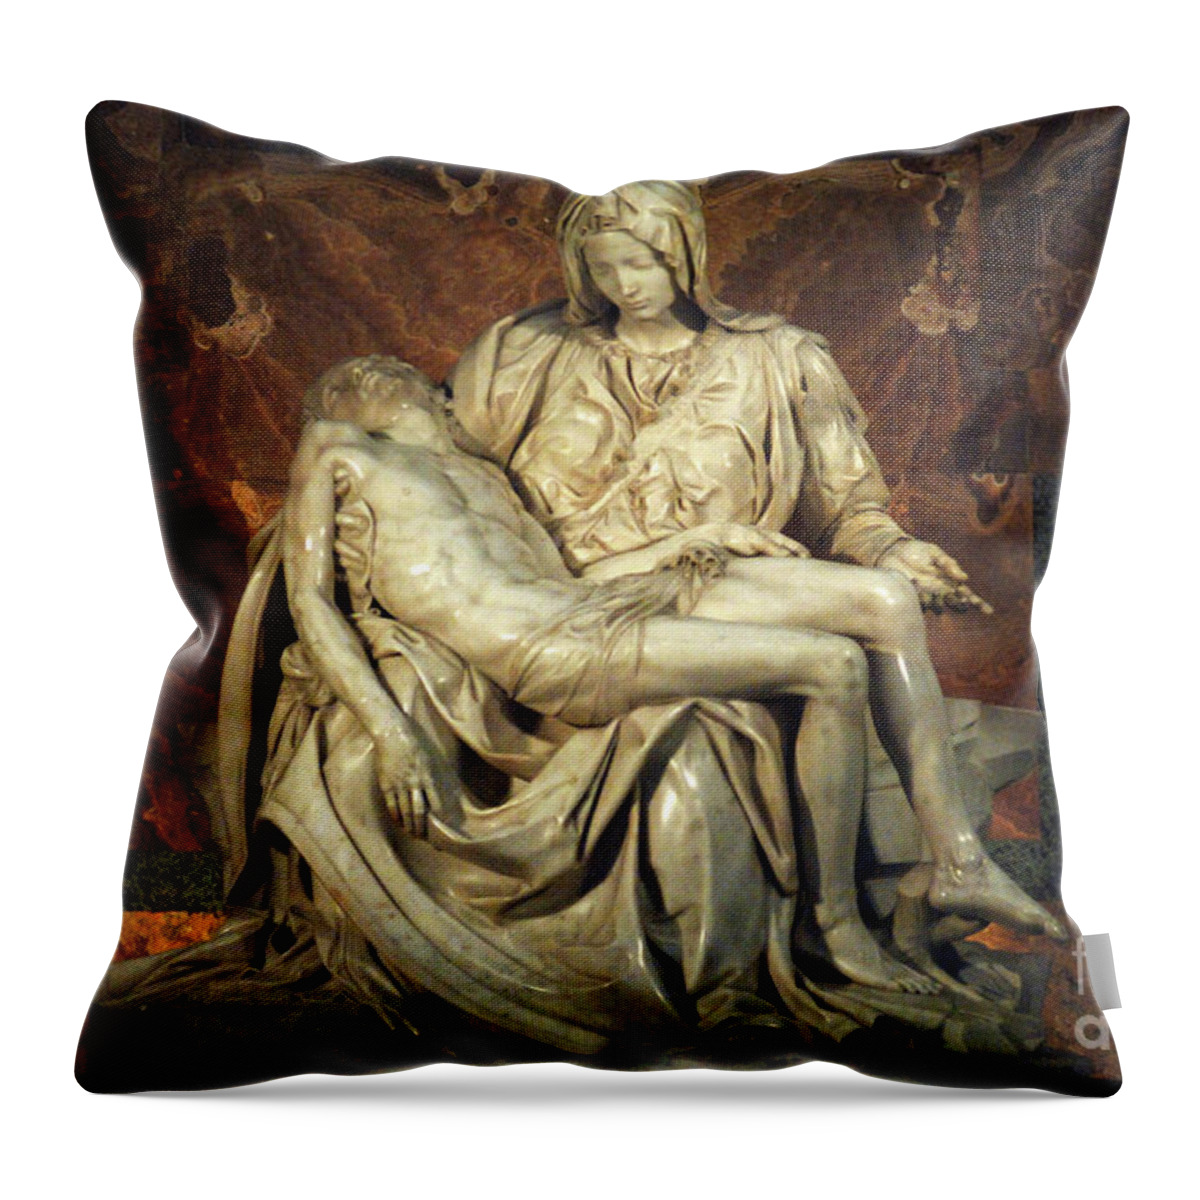  Italy Throw Pillow featuring the photograph The Pieta by Bob Christopher